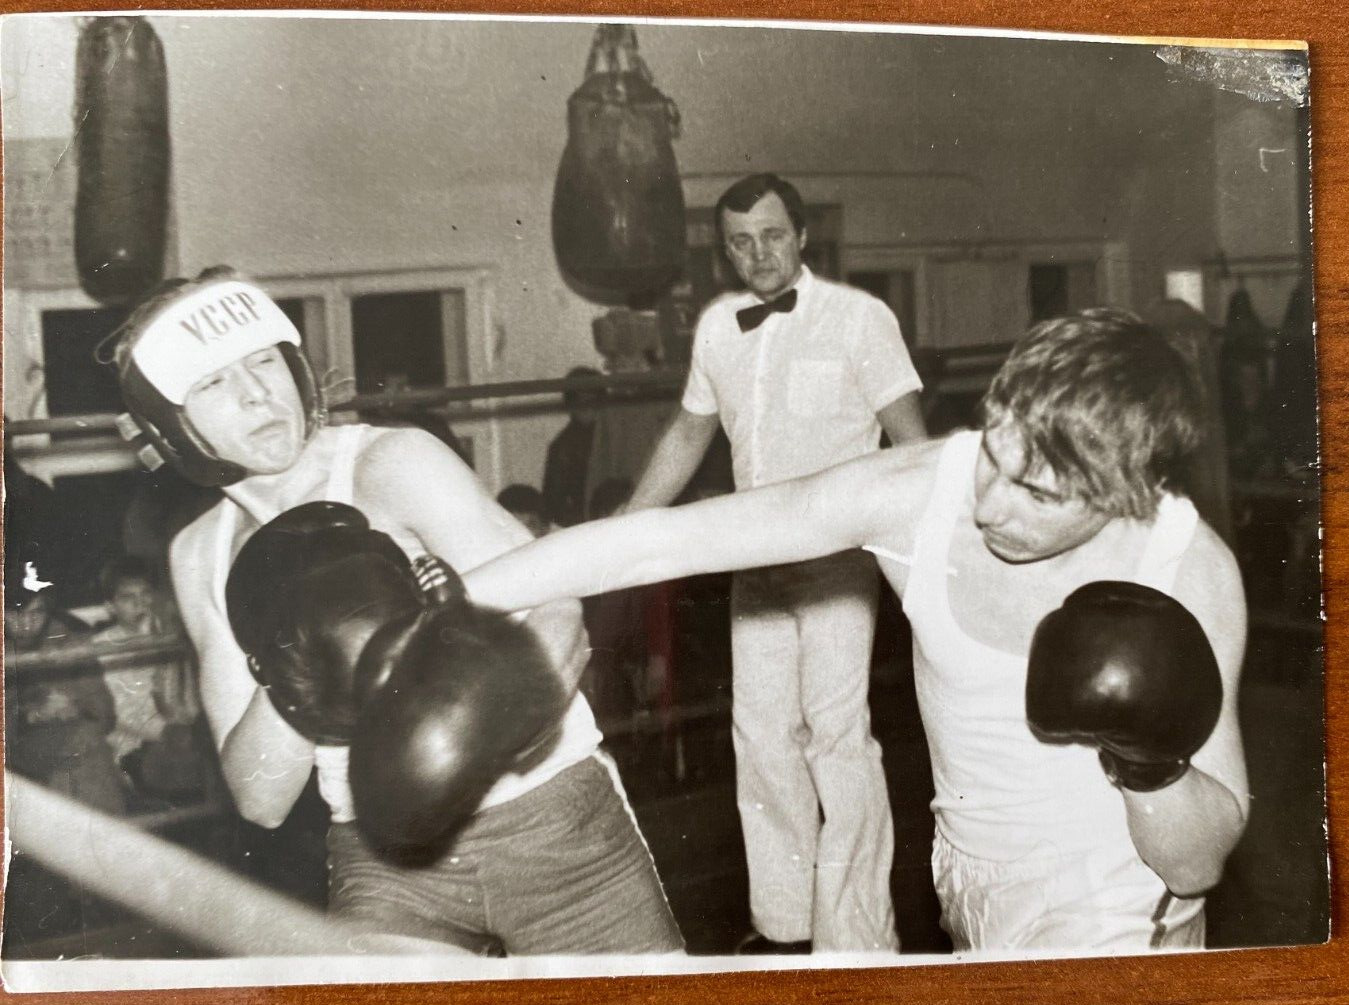 Beautiful guys boxing in competitions. Vintage photo